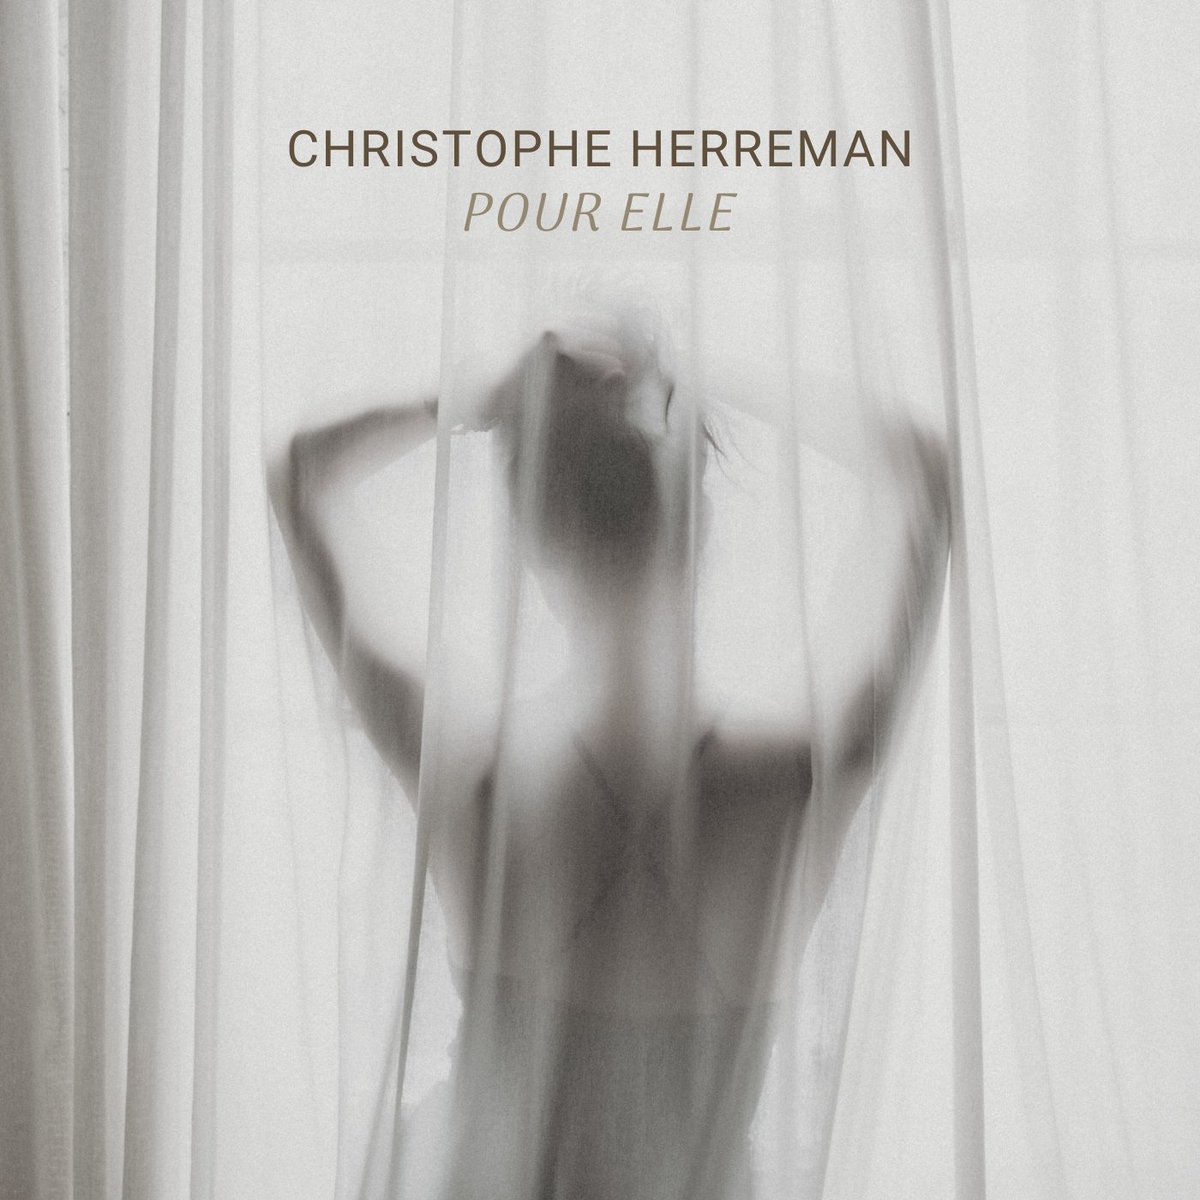 'Pour Elle', my new single, is out now! Check it out on Spotify, Apple Music and other streaming services. (link in bio)

Thanks for listening 🙏

#modernclassical #neoclassical #piano #contemporaryclassical #music #pianomusic #newmusic #classicalmusic #pianist #solopiano